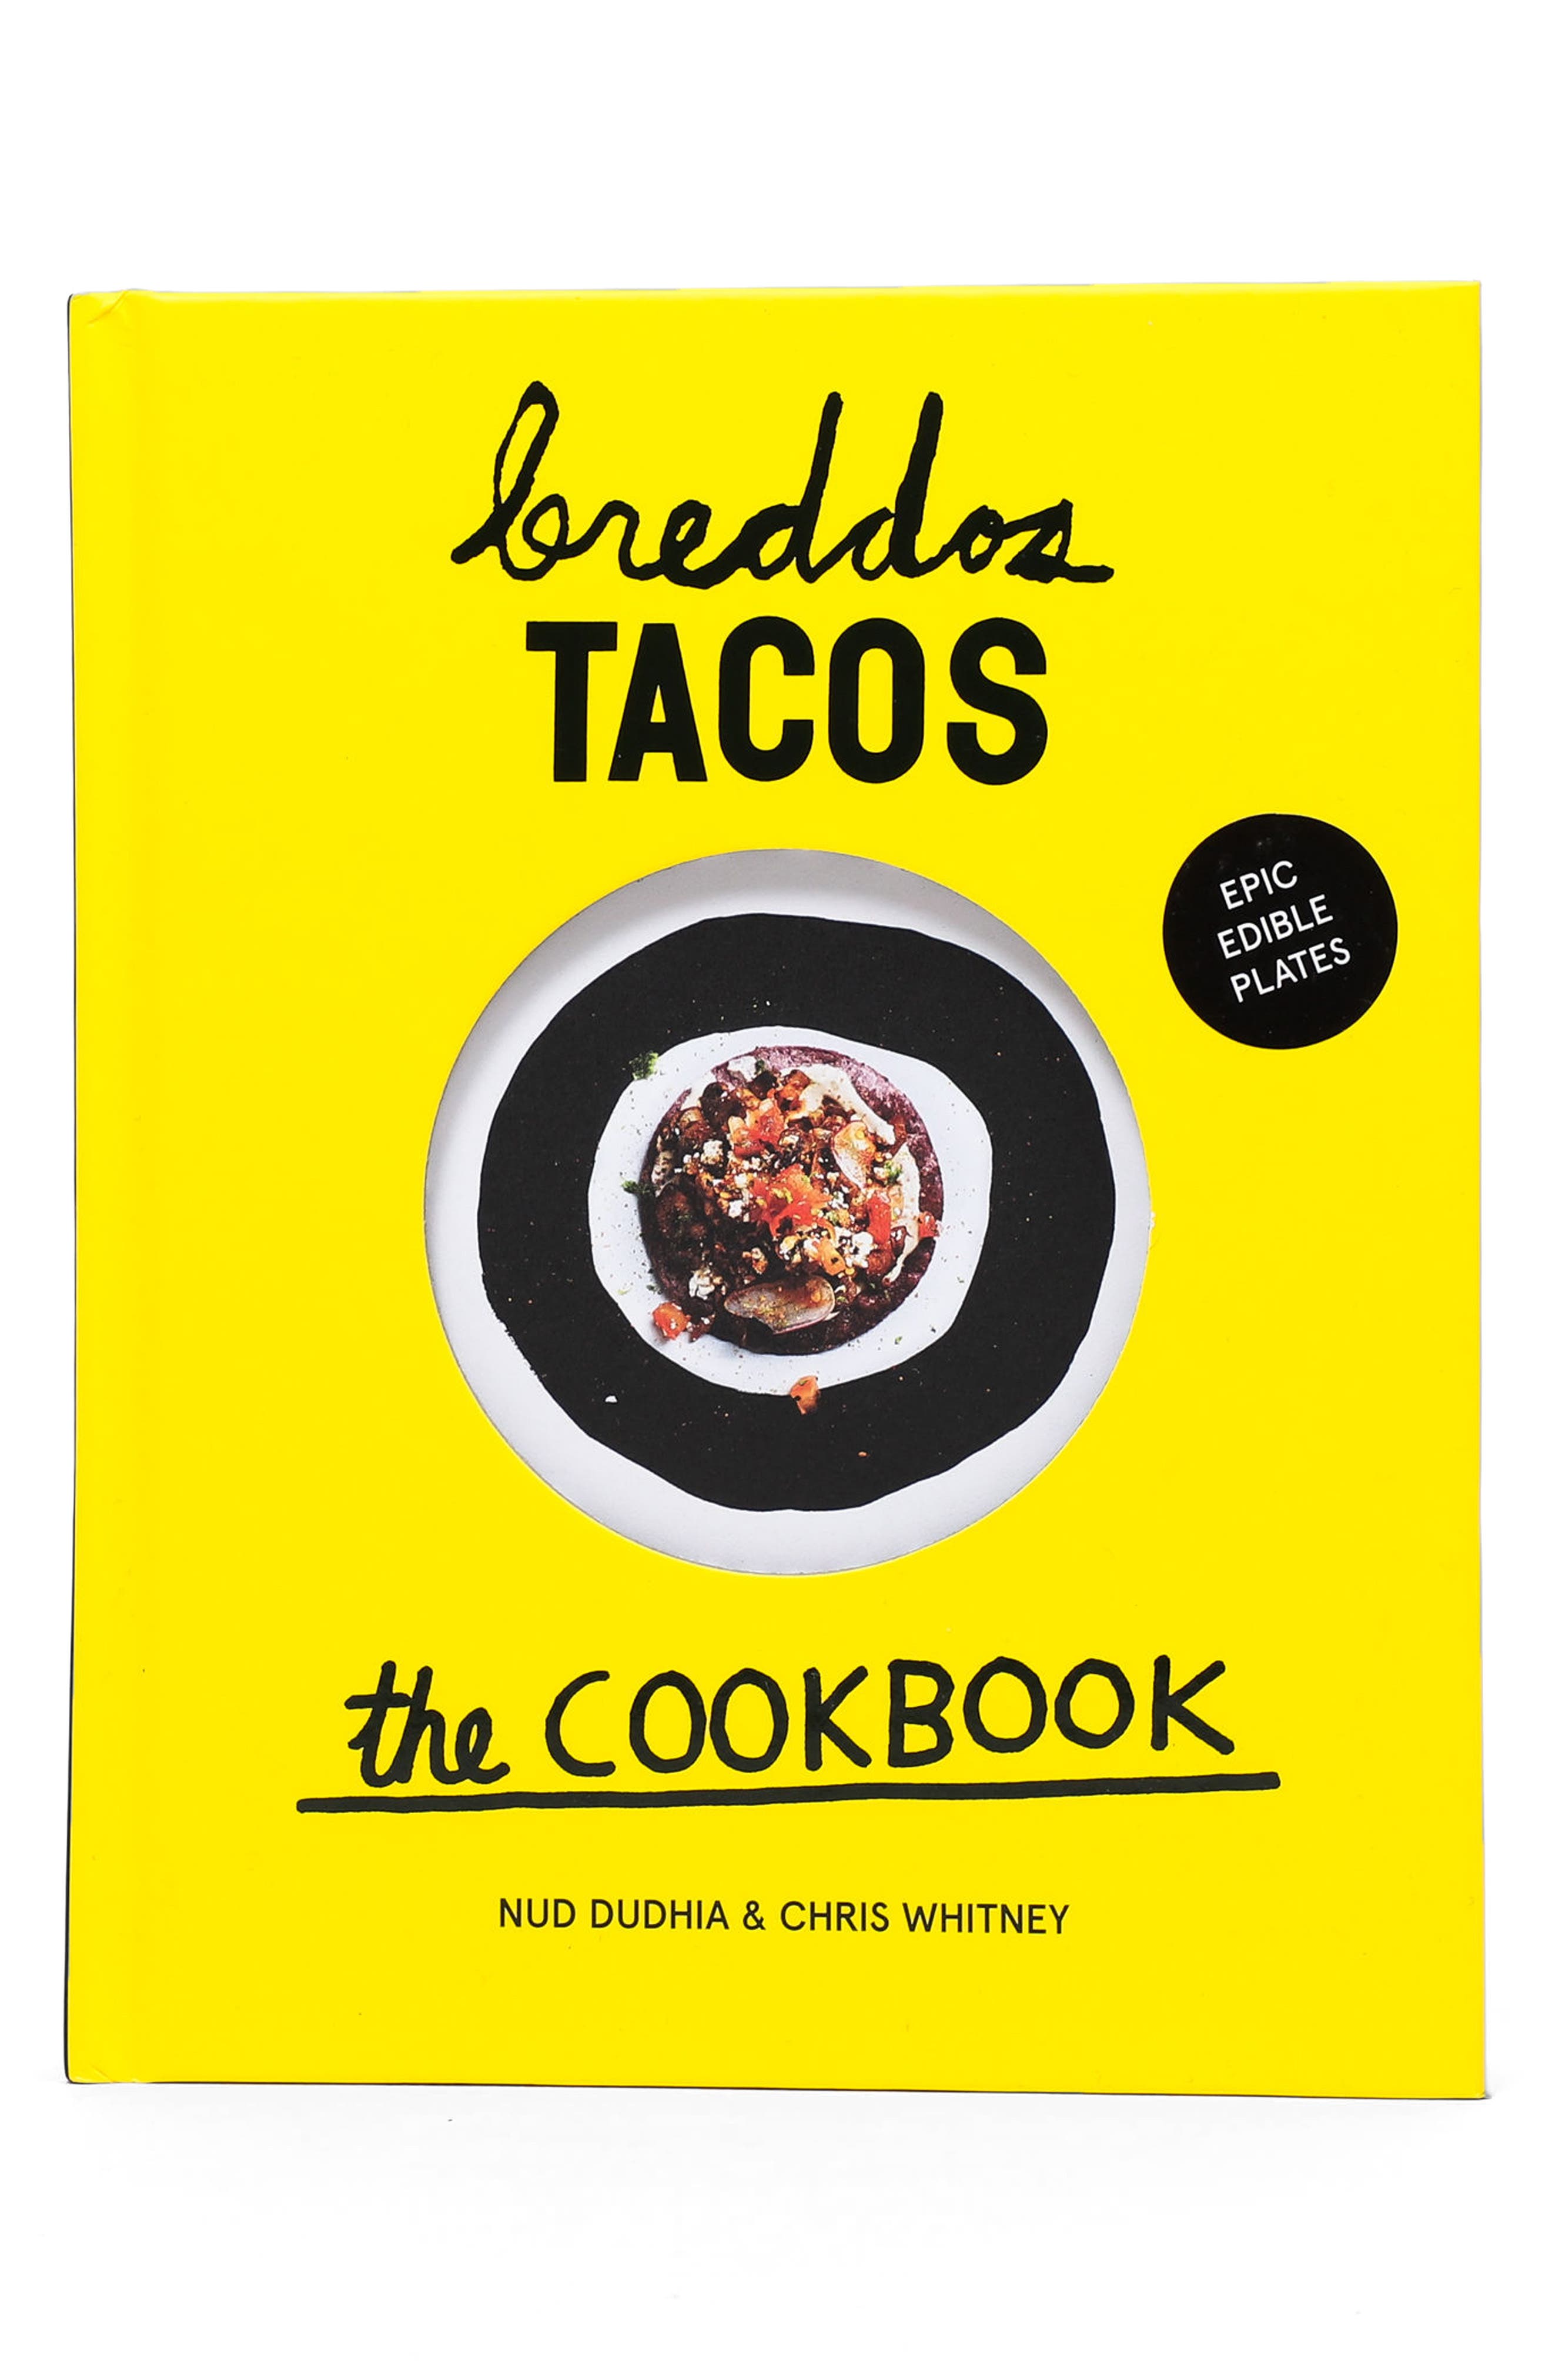 ISBN 9781849497992 product image for Breddos Tacos Cookbook, Size One Size - Yellow | upcitemdb.com